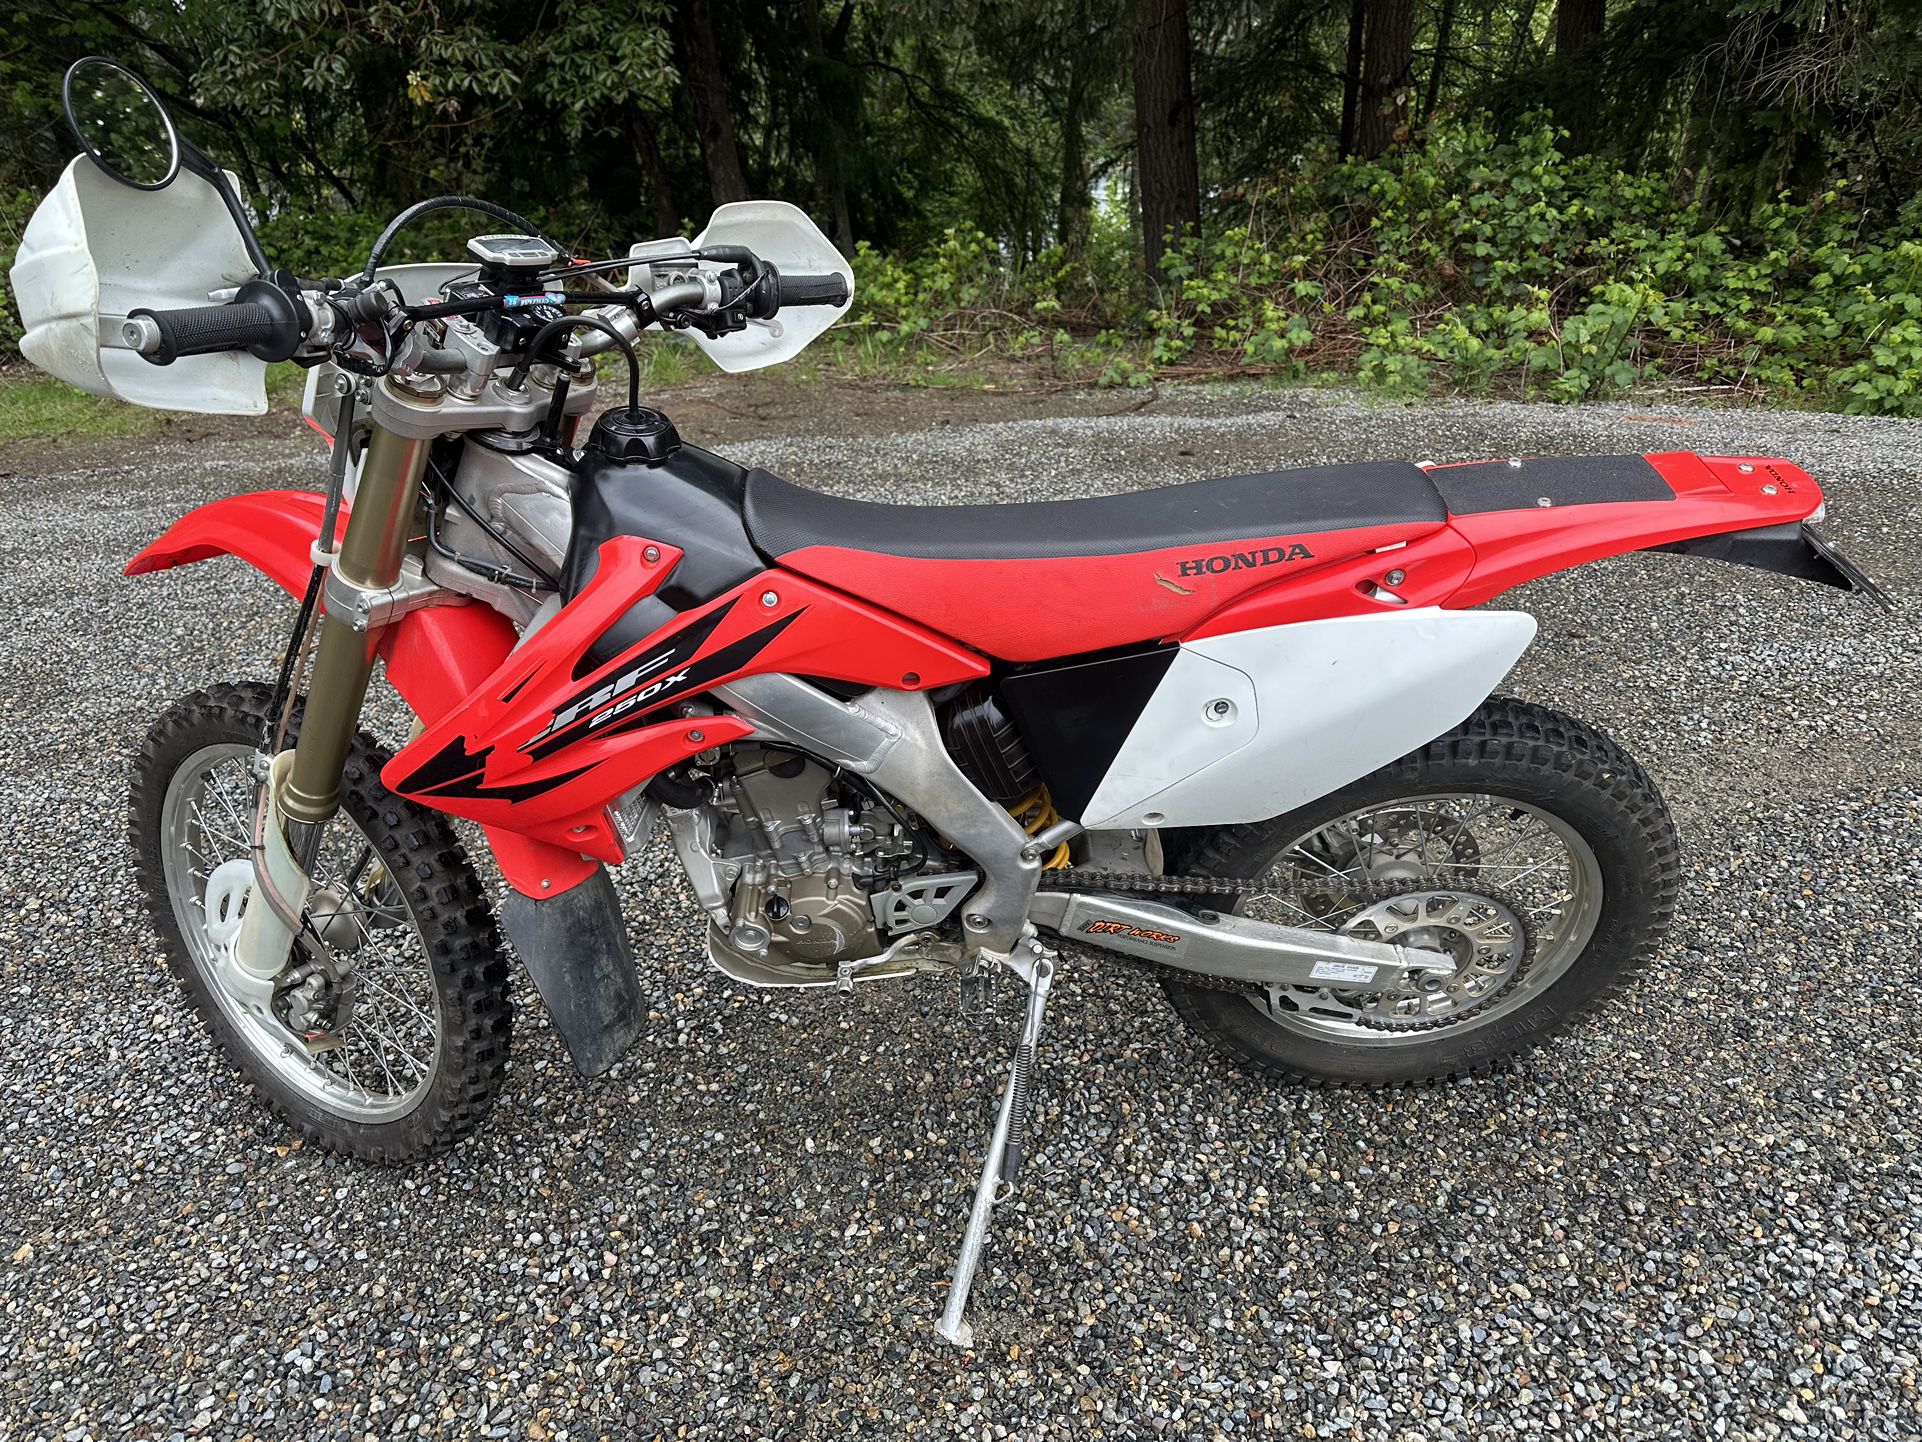 2006 Honda Crf250x  With Recluse Clutch With plate